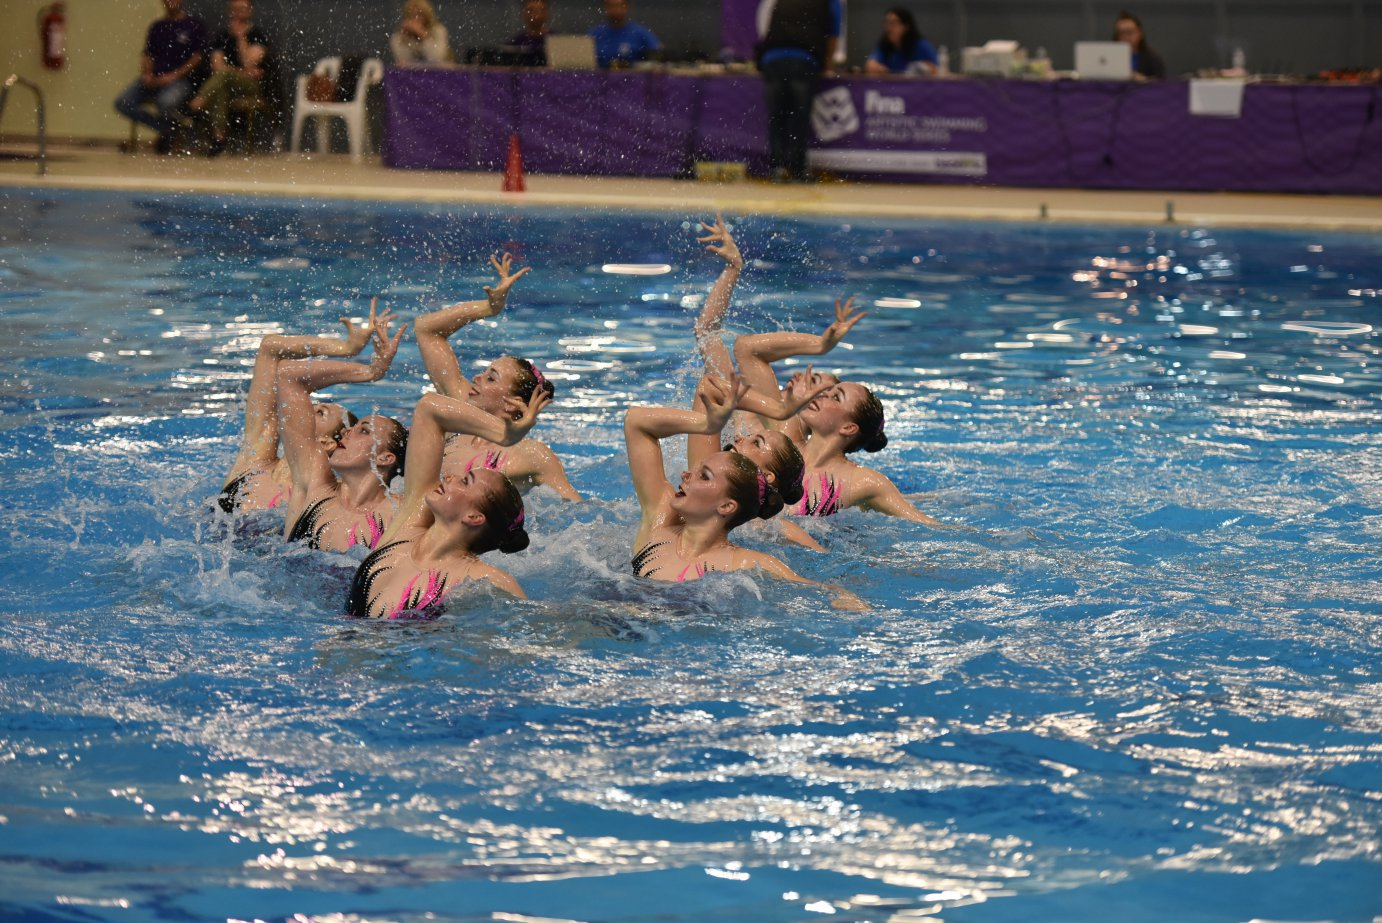 Ukraine secured victory in the team technical event ©FINA